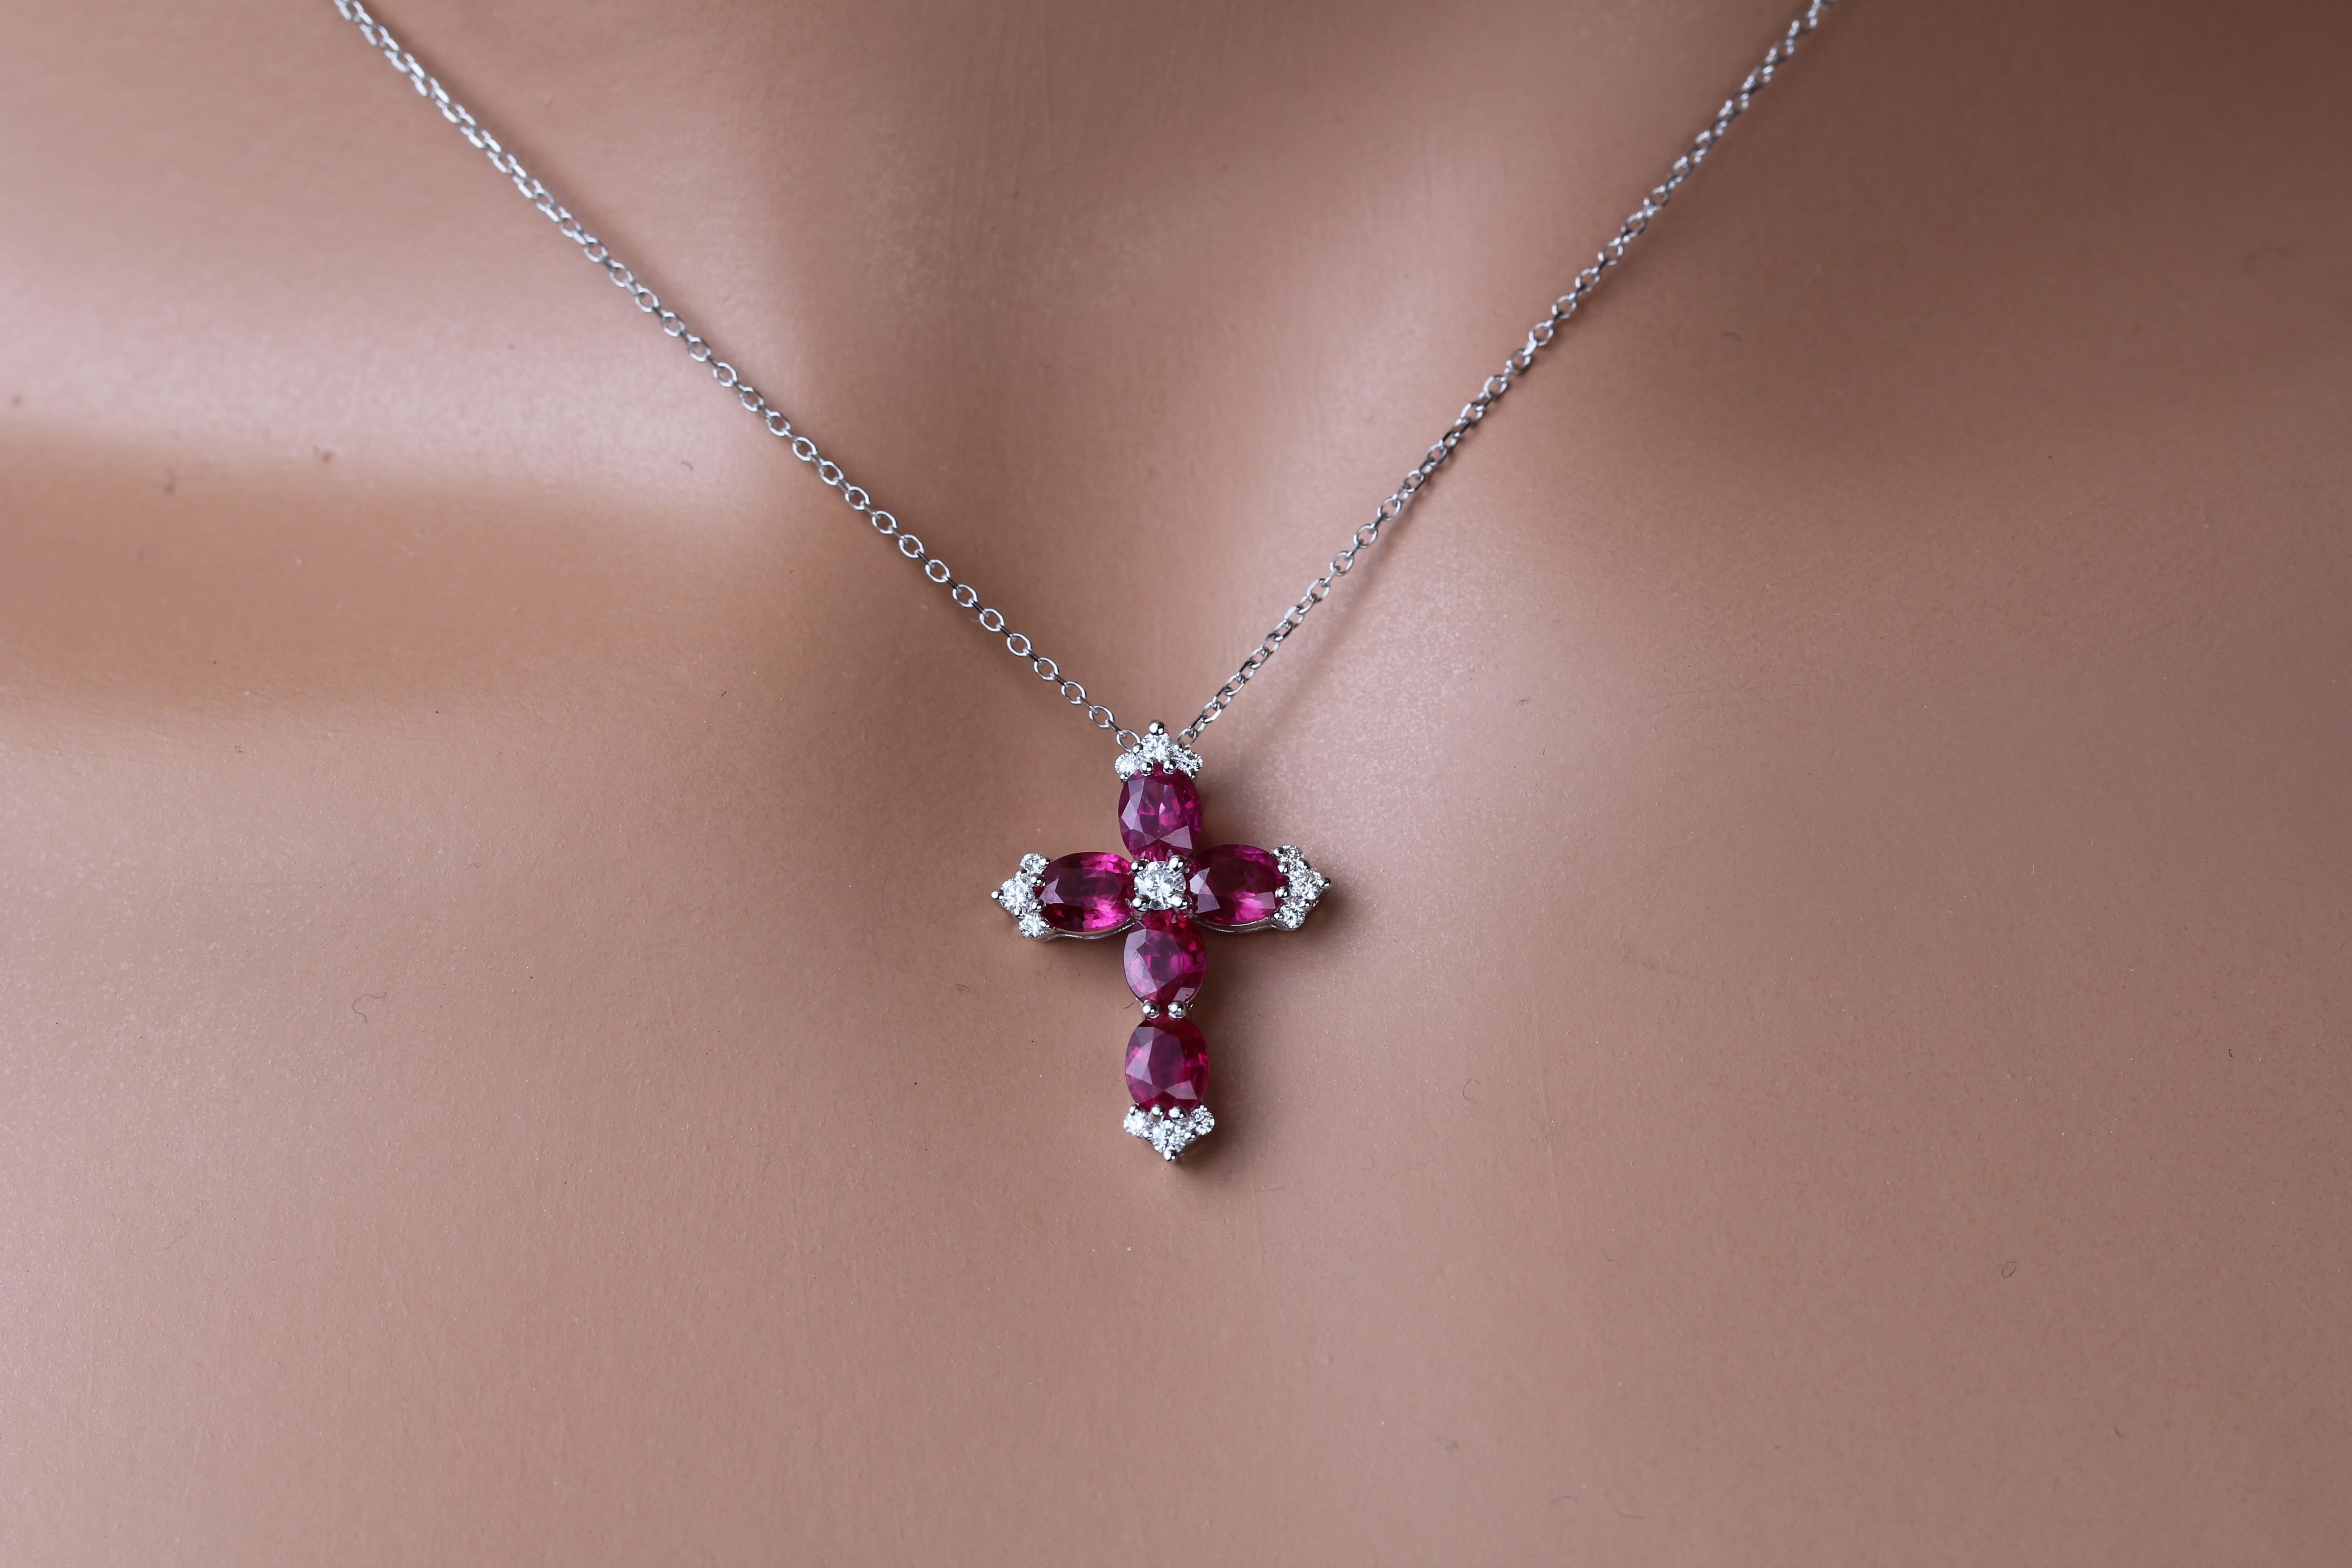 At the heart of this stunning cross pendant lies a central round natural diamond, surrounded by five oval-cut vivid red rubies, totaling a dazzling 1.56 carats. These rubies are carefully handpicked to exude an enchanting and captivating aura.

Each